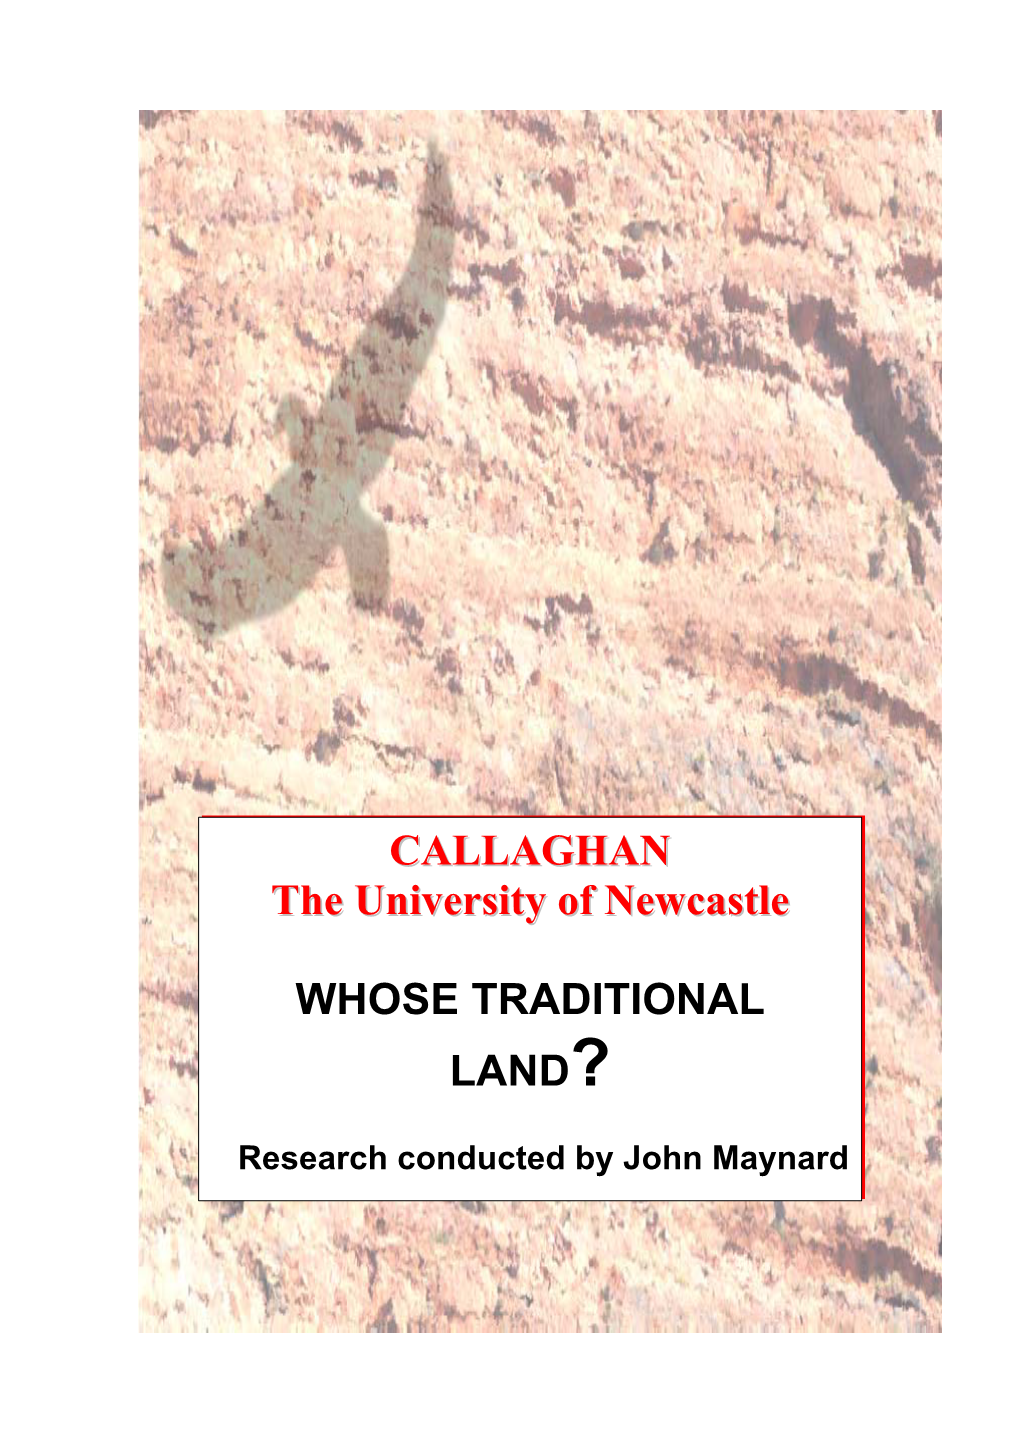 CALLAGHAN the University of Newcastle WHOSE TRADITIONAL